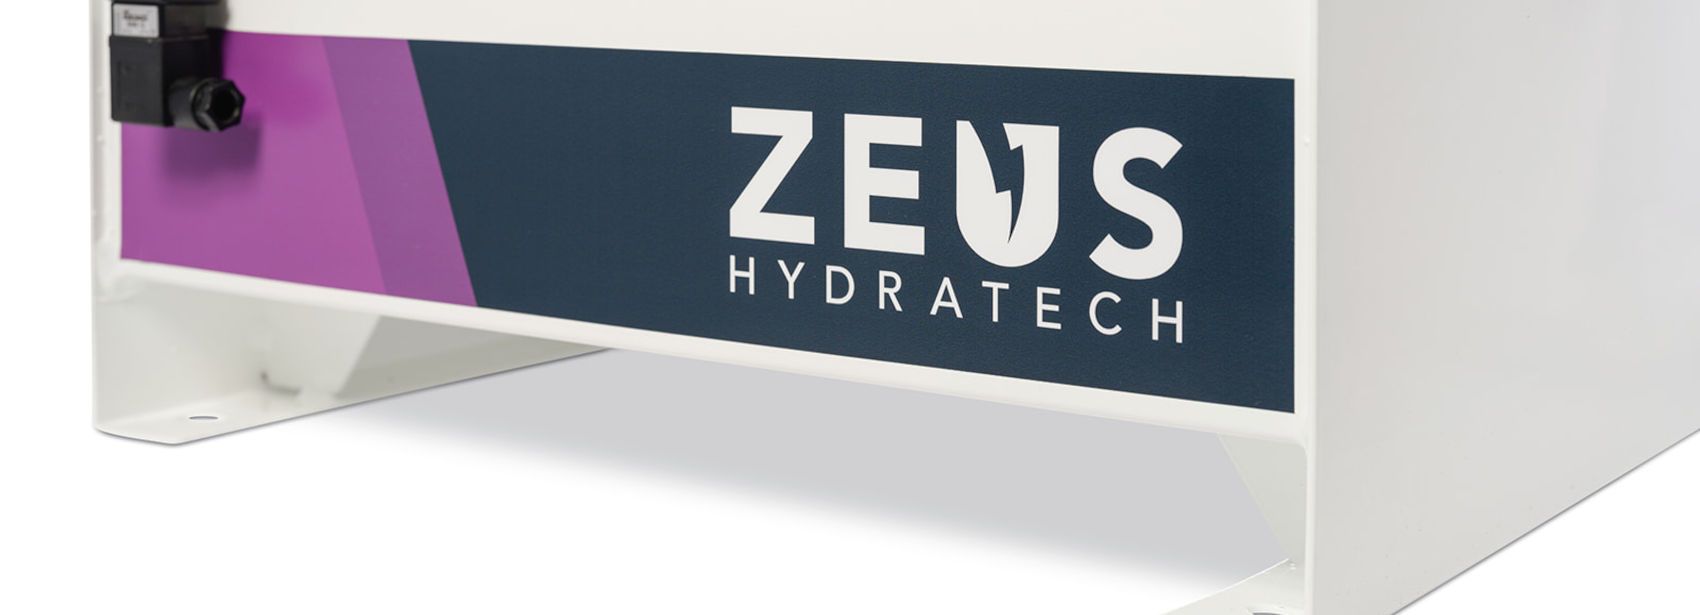 The Benefits of Using Zeus Hydratech's Industrial Power Packs header image